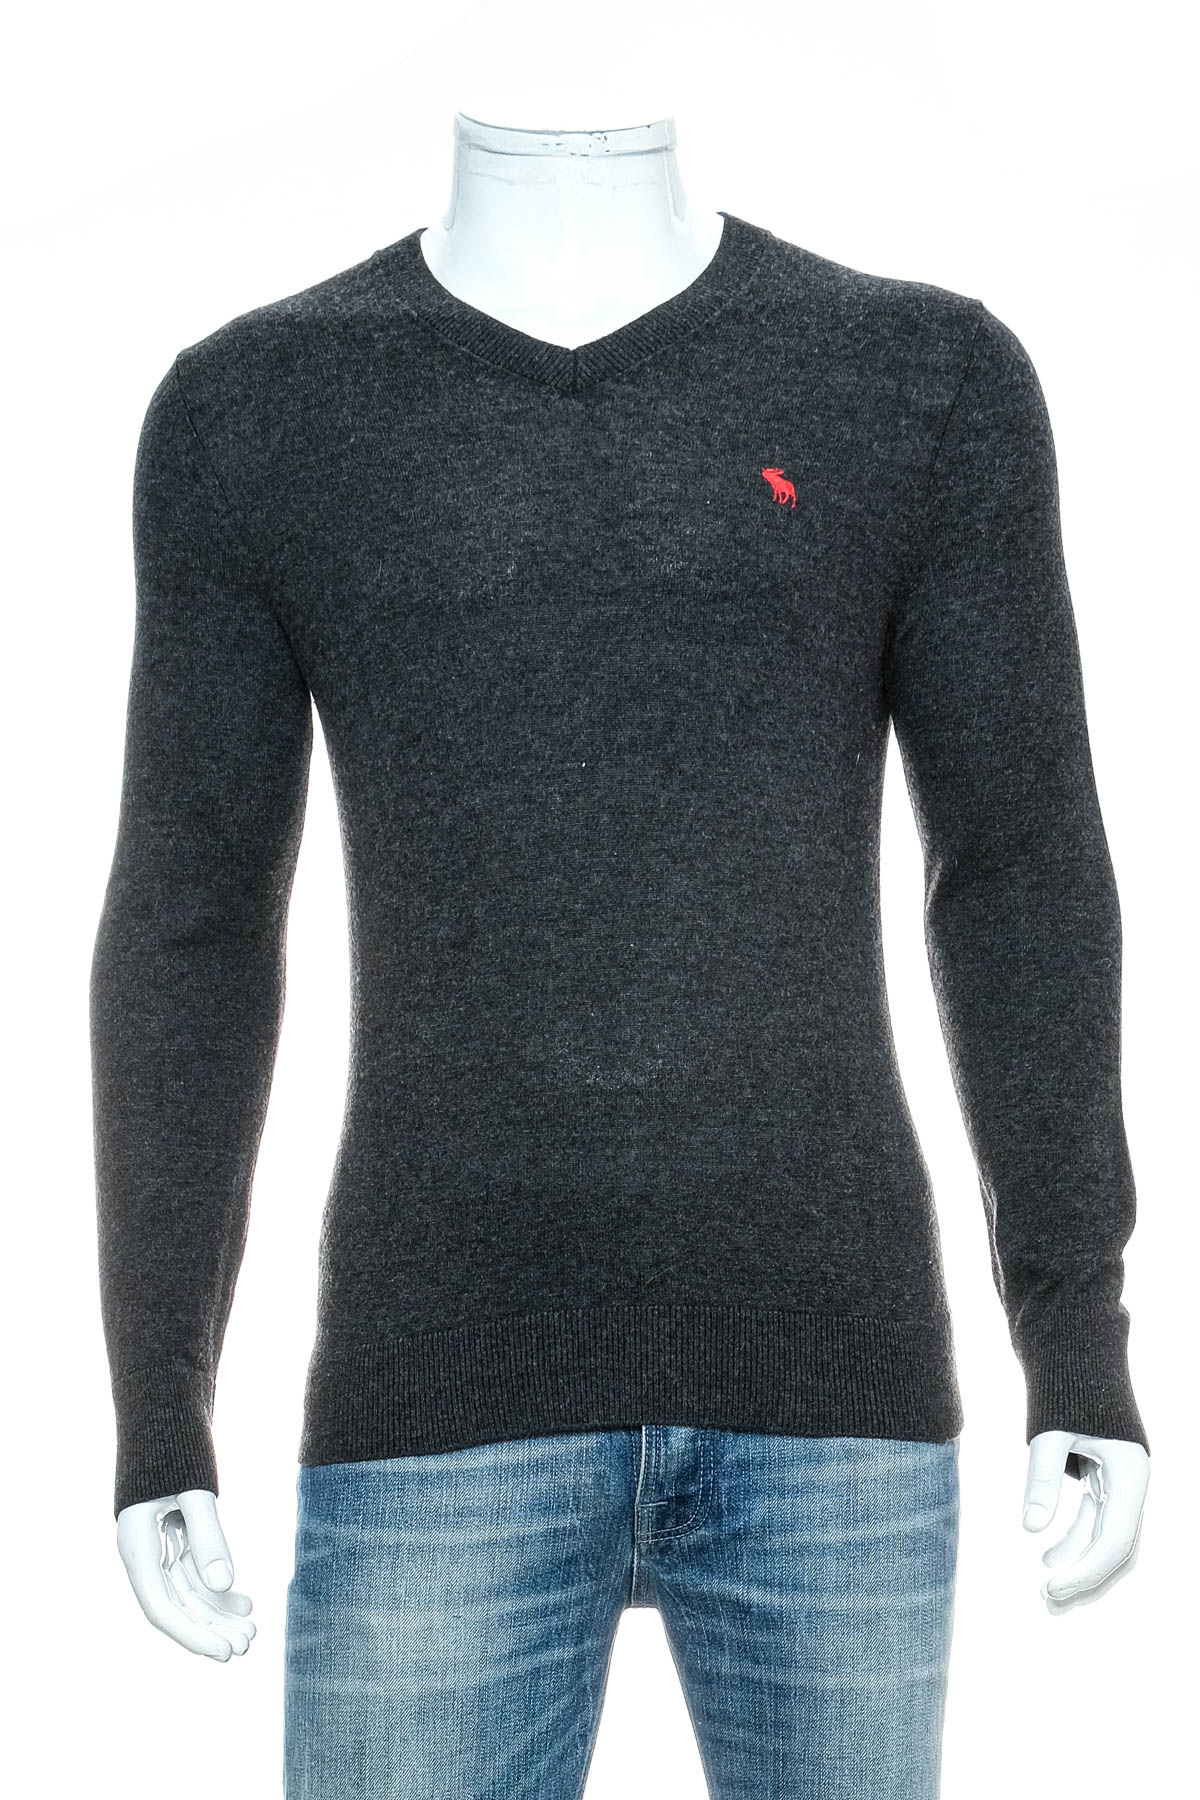 Men's sweater - Abercrombie & Fitch - 0